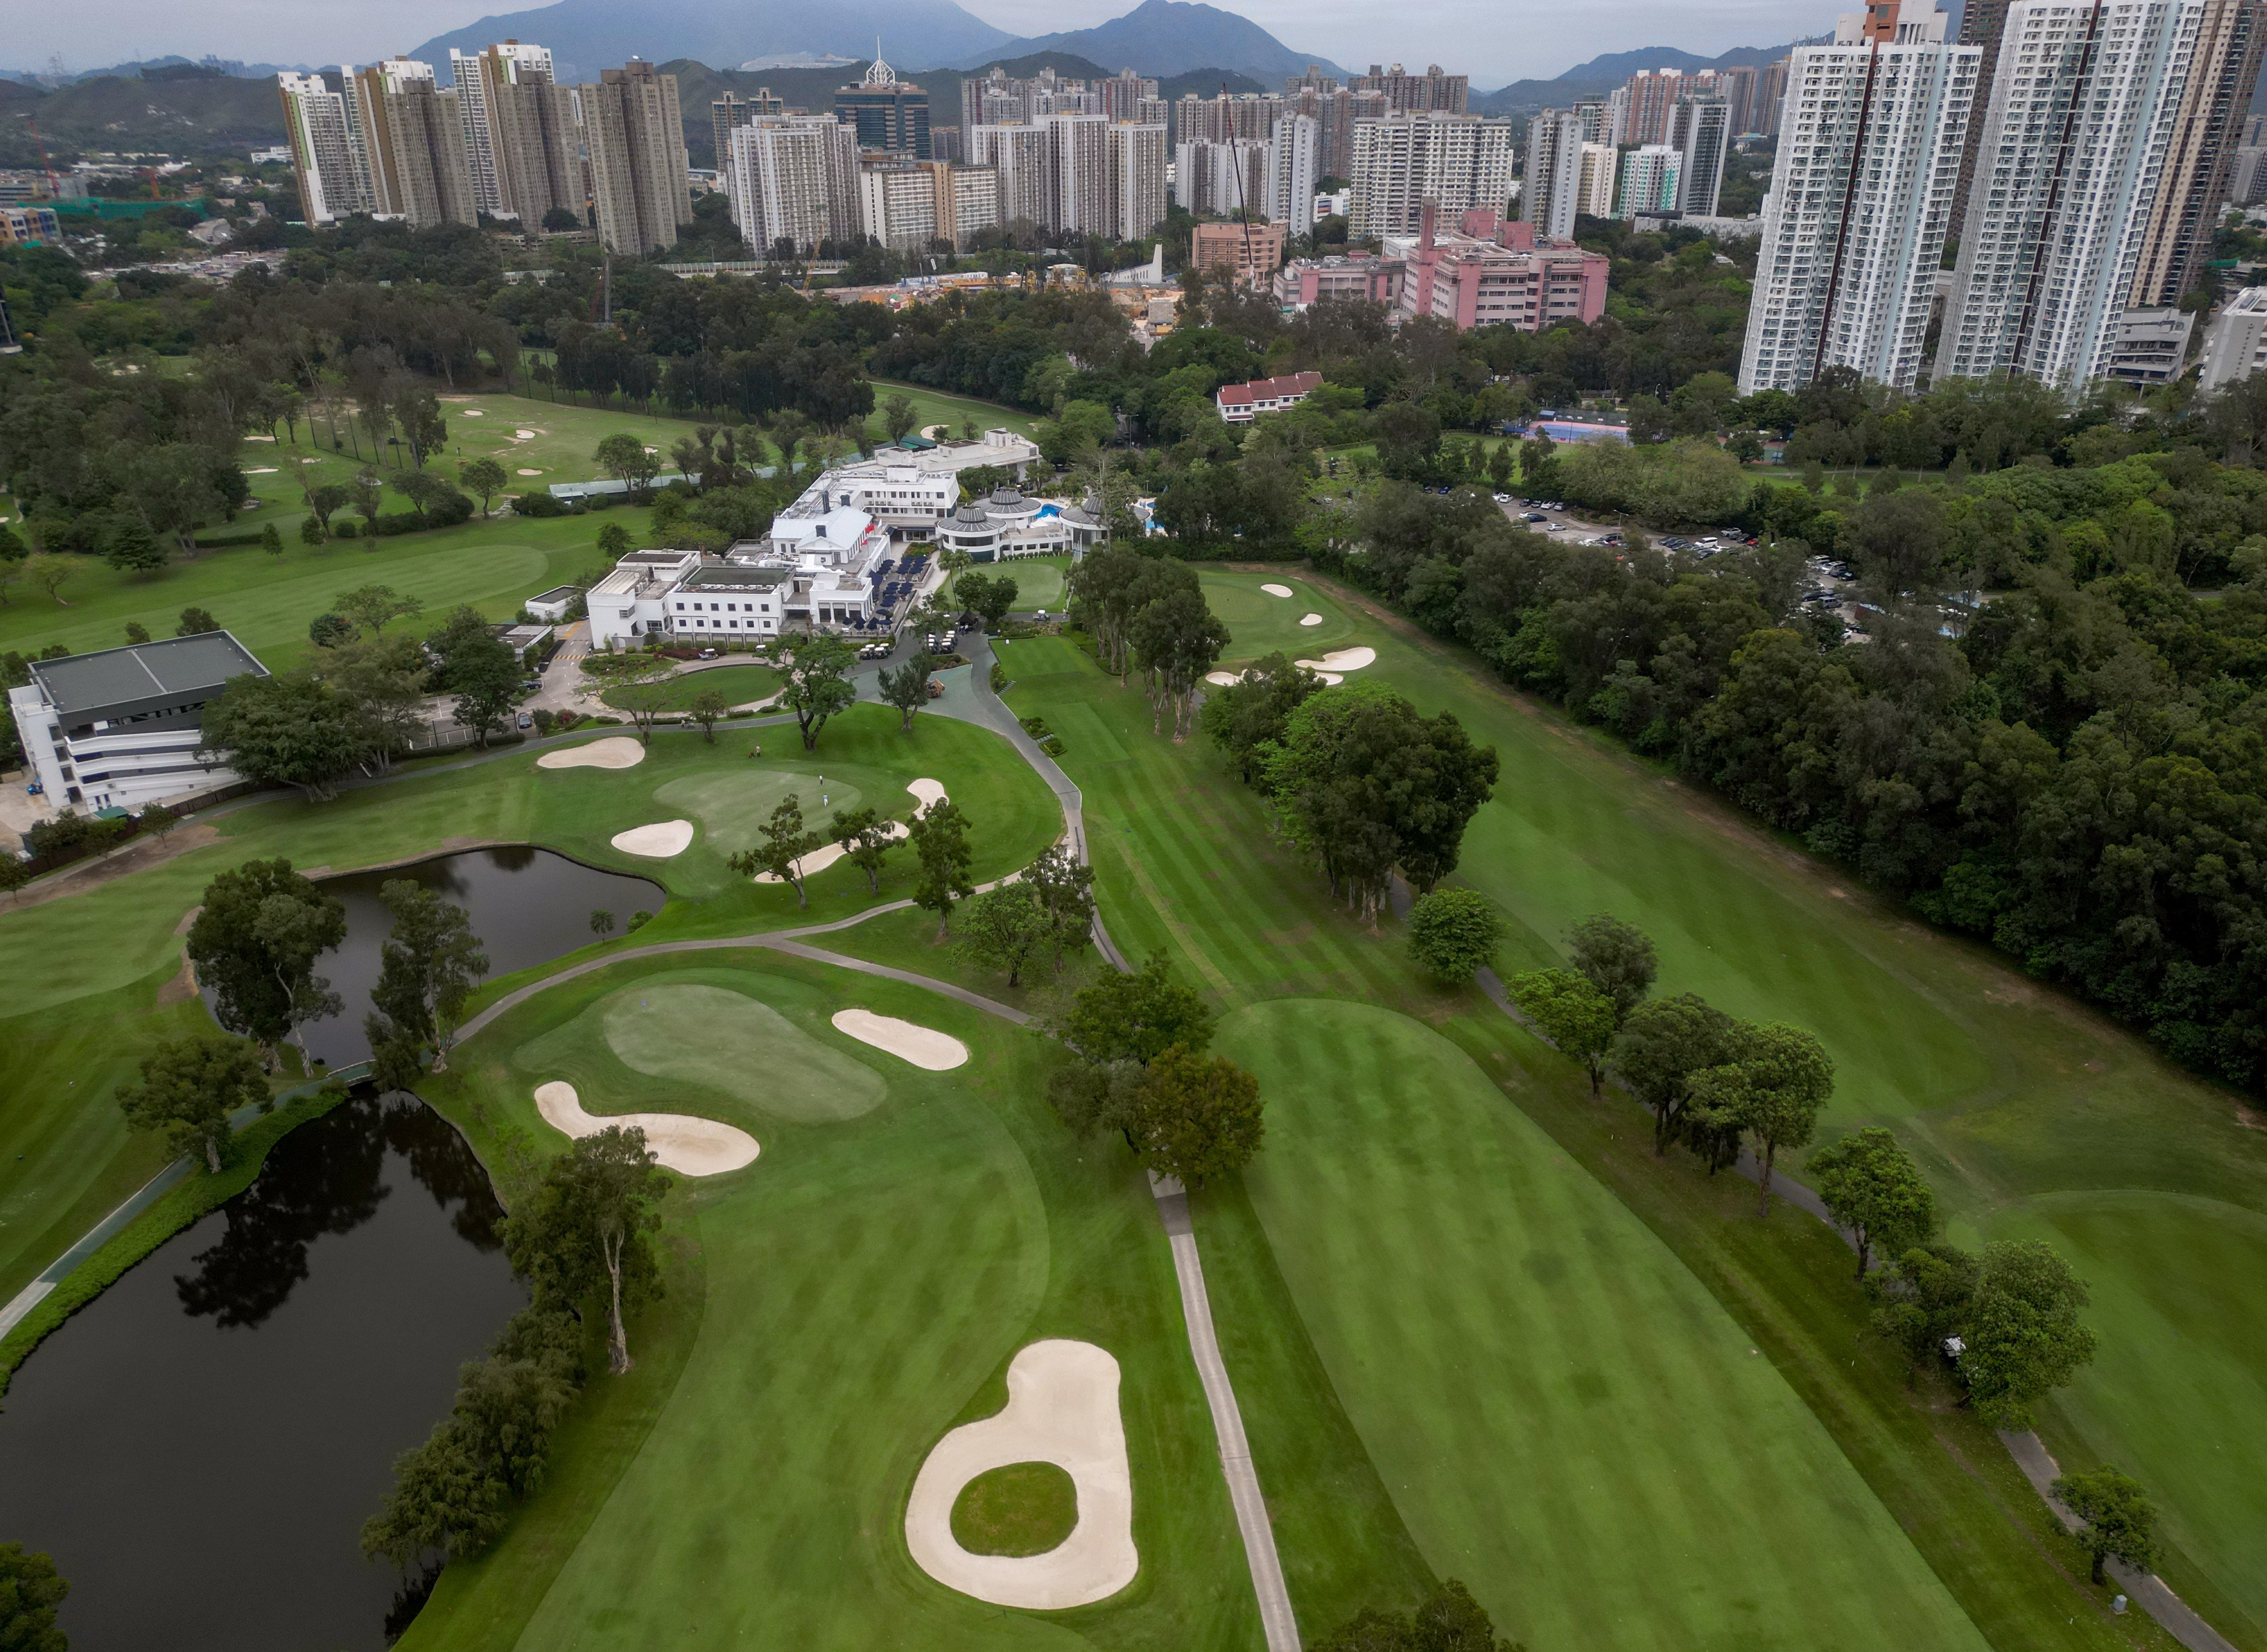 The government has proposed building 12,000 public housing flats on 9.5 hectares of the Hong Kong Golf Course. Photo: May Tse